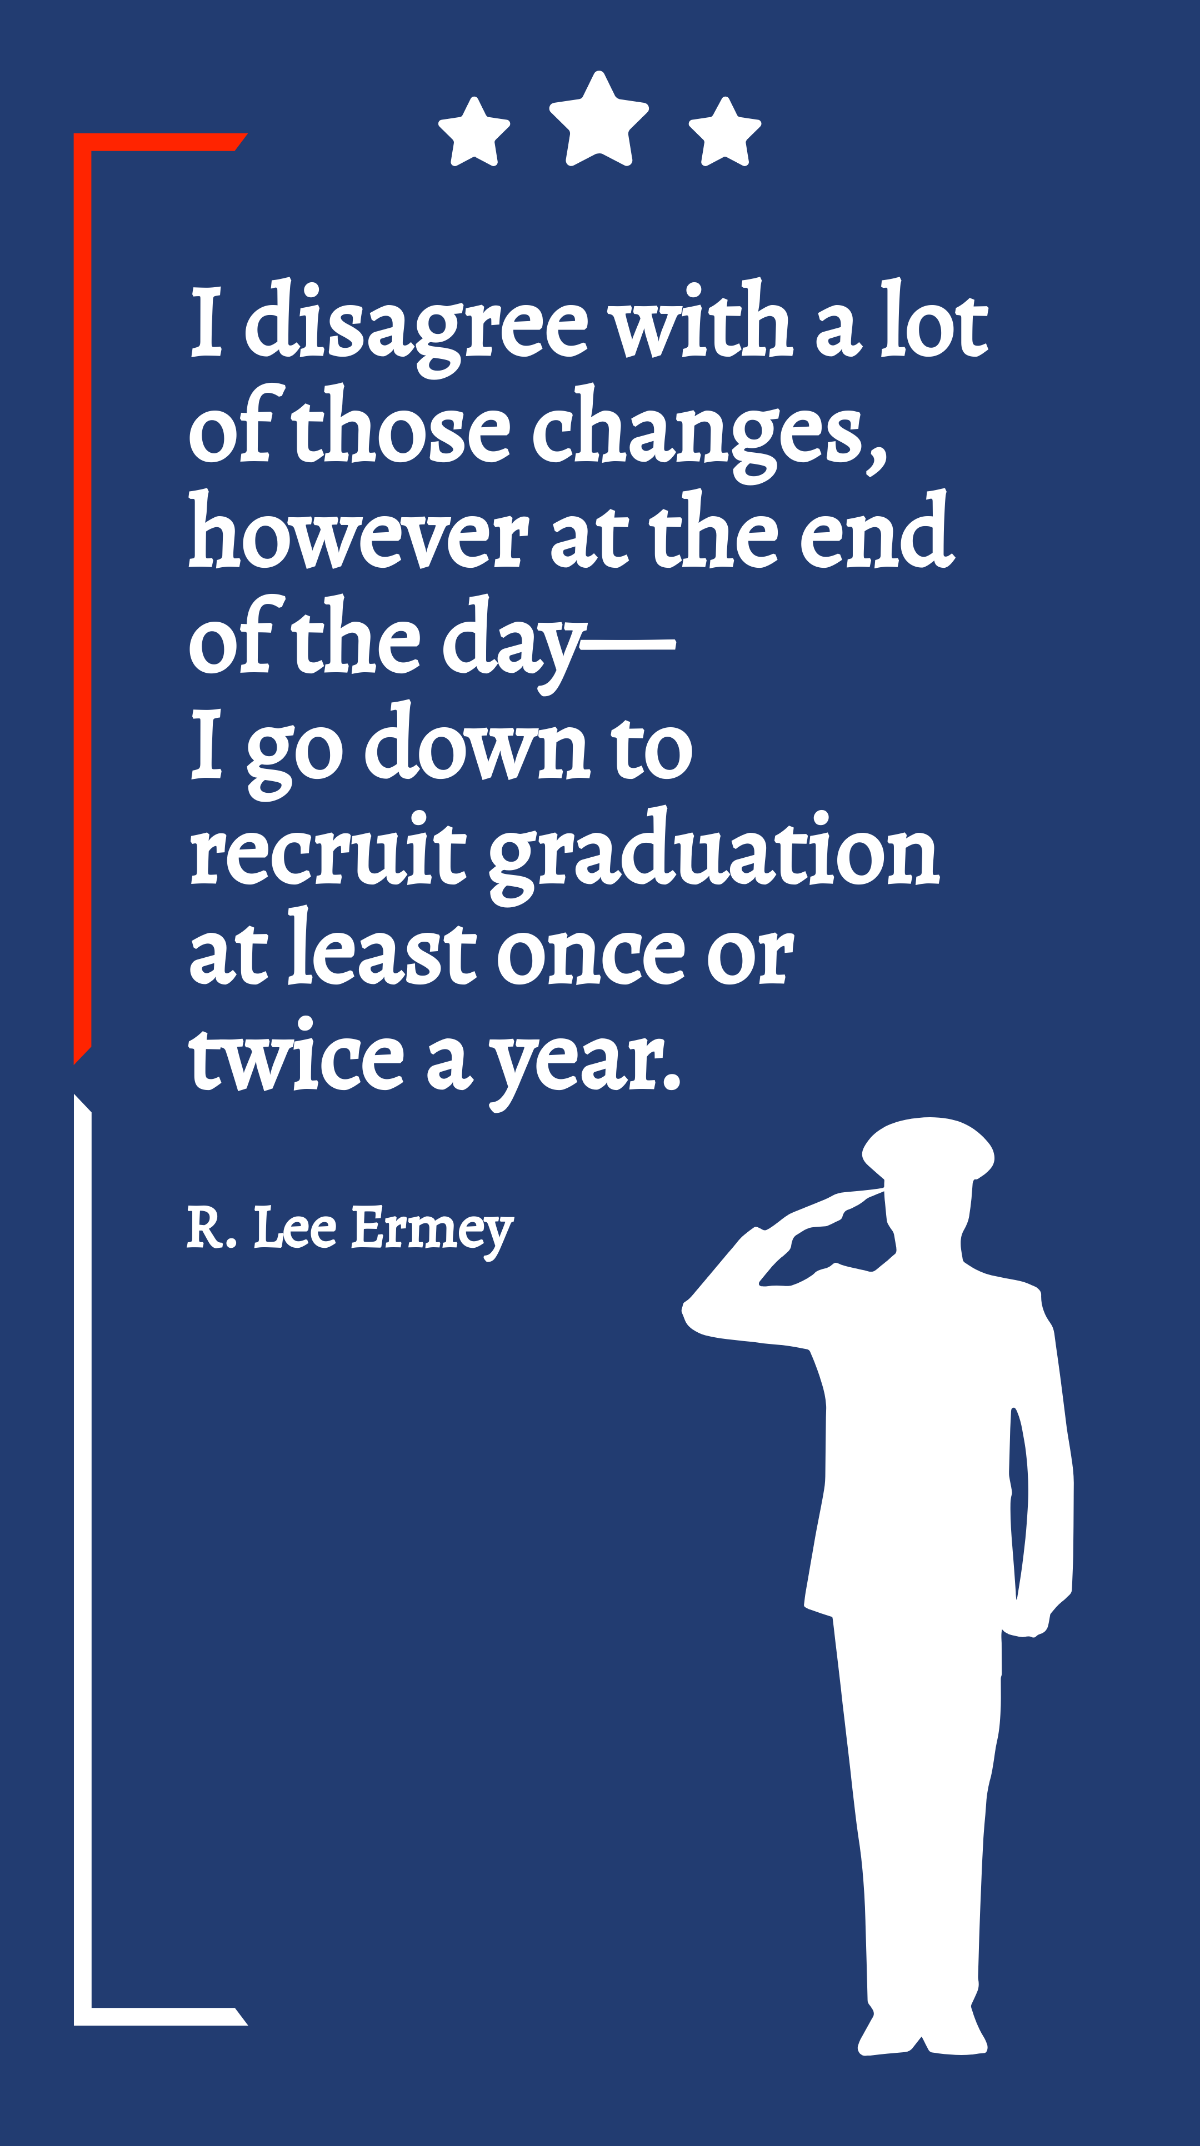 Free R. Lee Ermey - I disagree with a lot of those changes, however at the end of the day - I go down to recruit graduation at least once or twice a year. Template